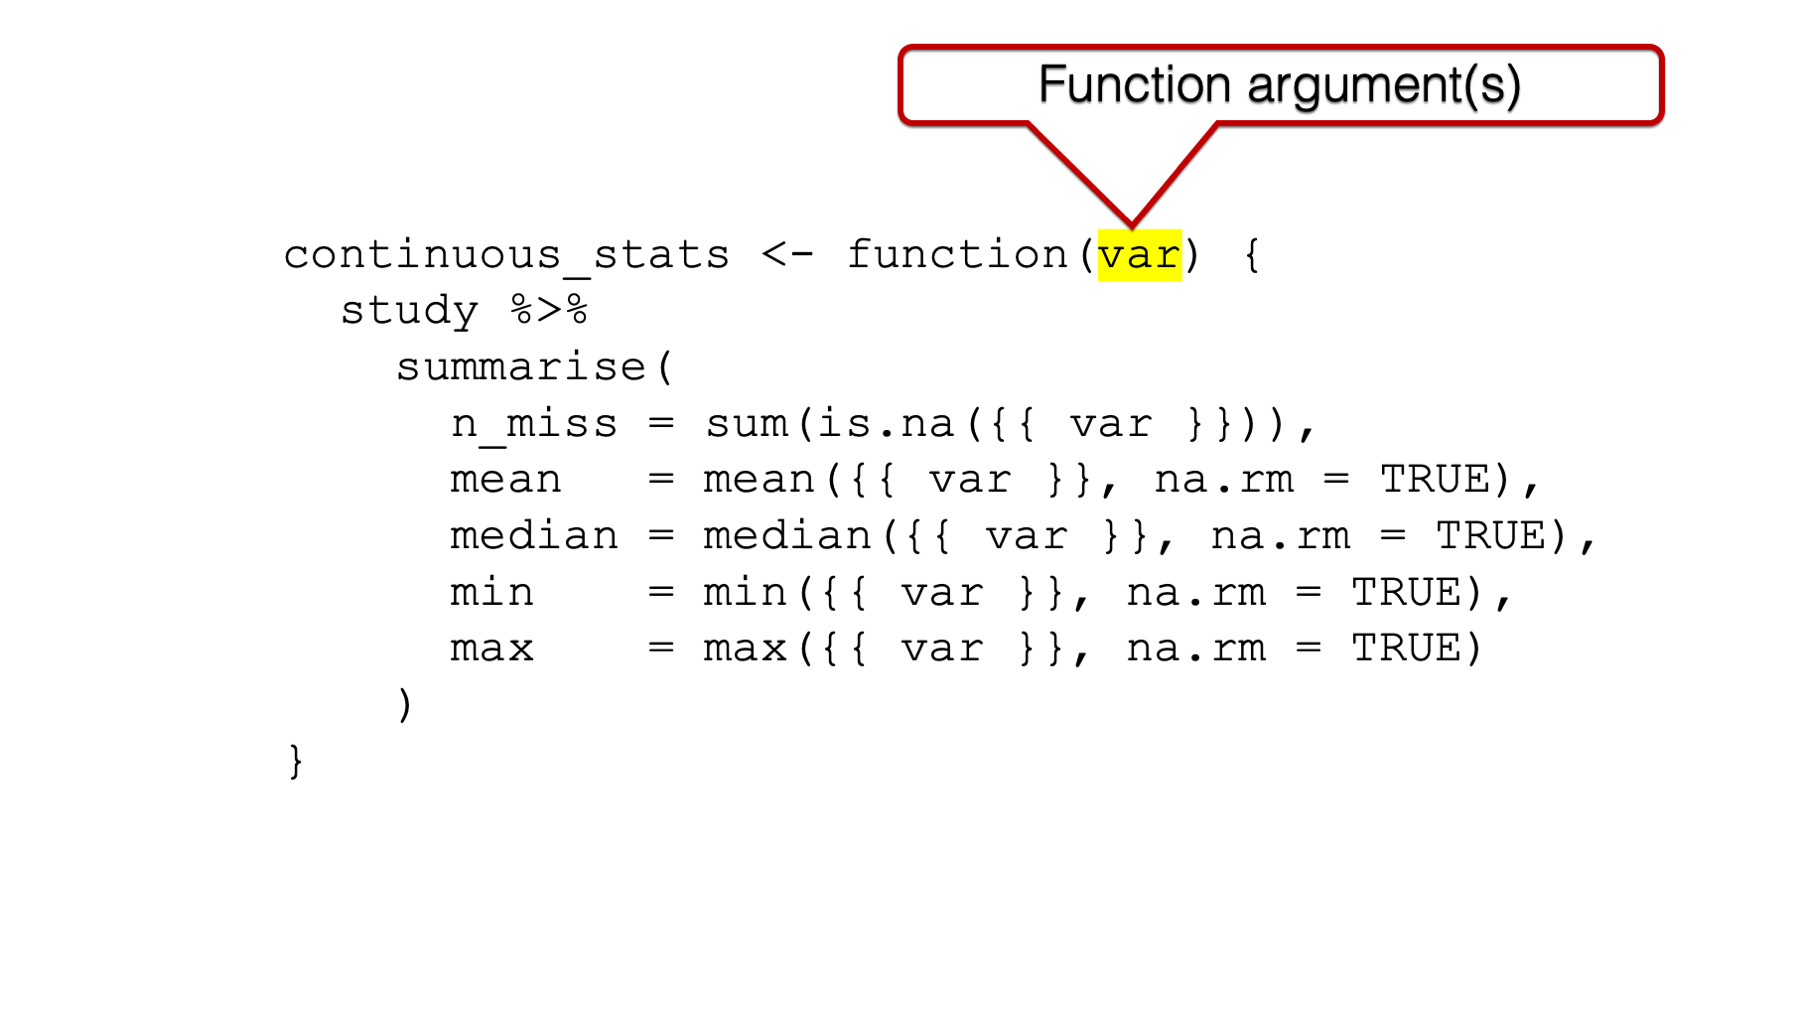 The function argument(s).